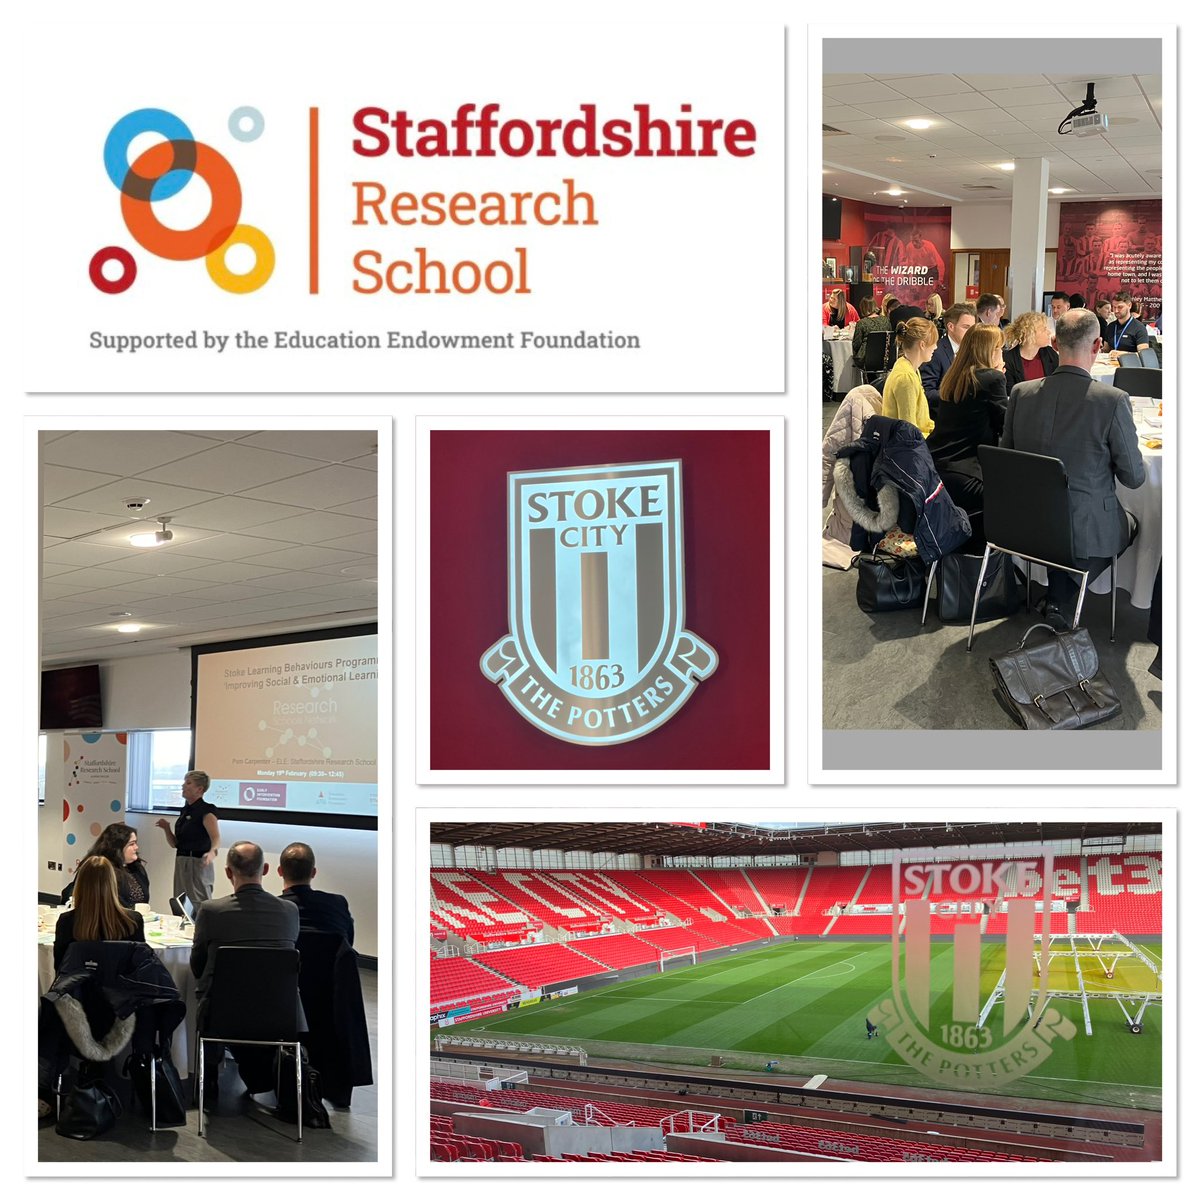 A fantastic turn out of 40 colleagues @stokecity from 25 schools for the start of the Stoke Schools’ Effective Learning Behaviours programme with @pammie112 @gatewayteach delivering the @EducEndowFoundn’s Social & Emotional Learning recommendations. @ClareOberman